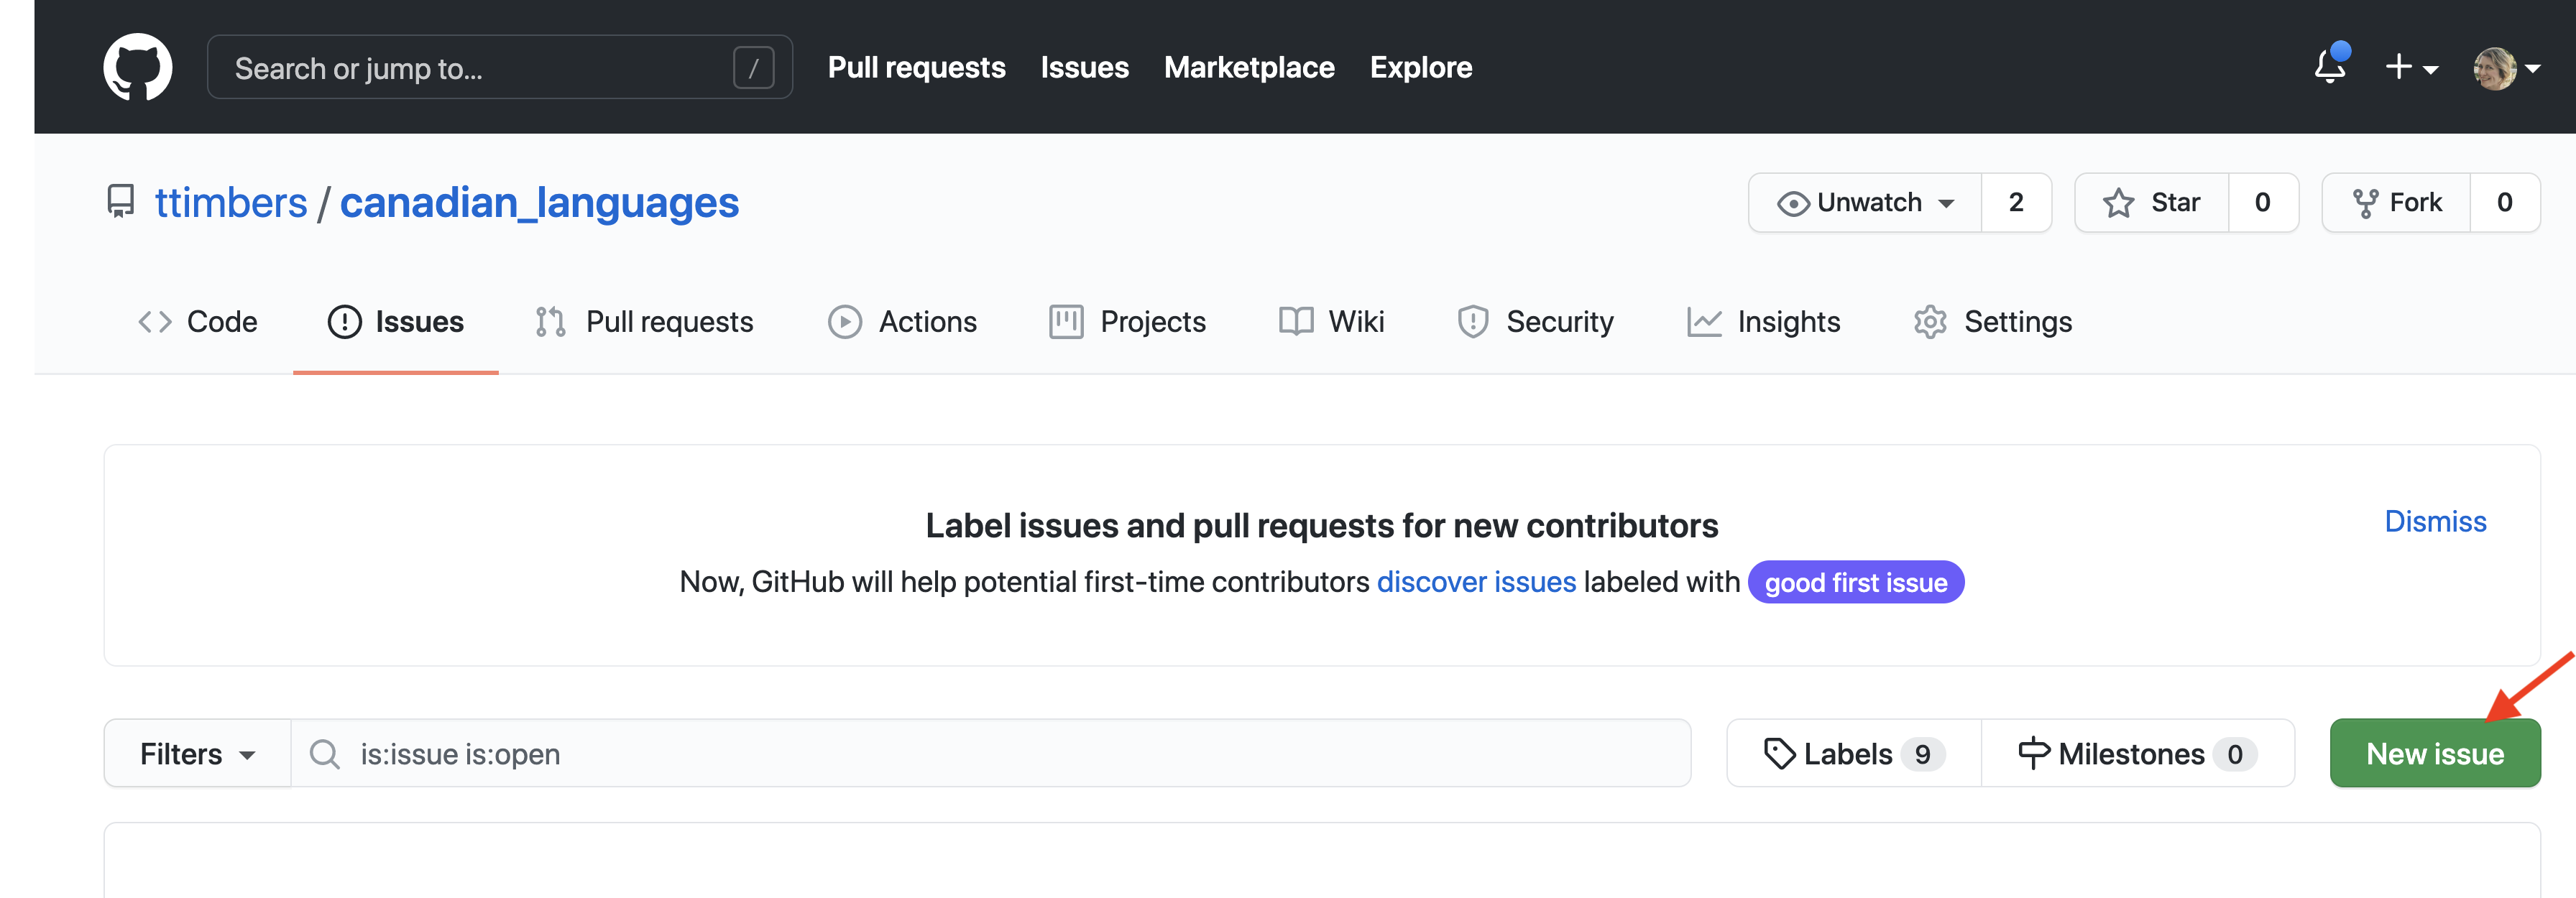 The “New issue” button on the GitHub web interface.